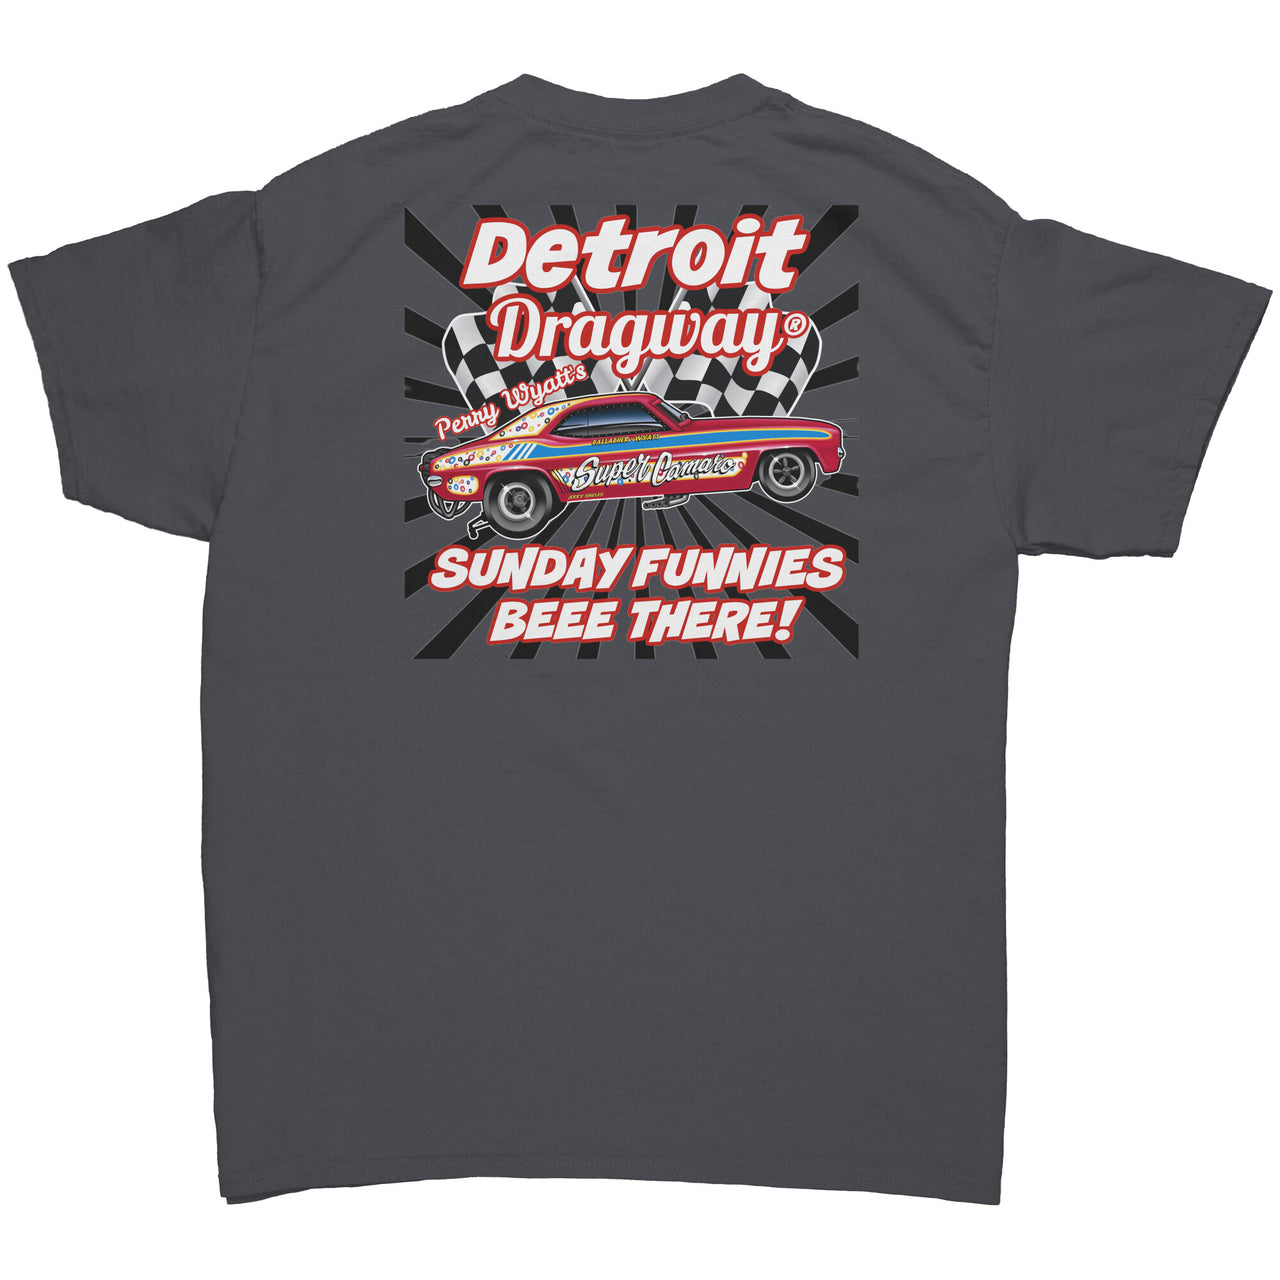 *Detroit Dragway® Perry Wyatt's Sunday Funnies T-Shirt Image On The Back